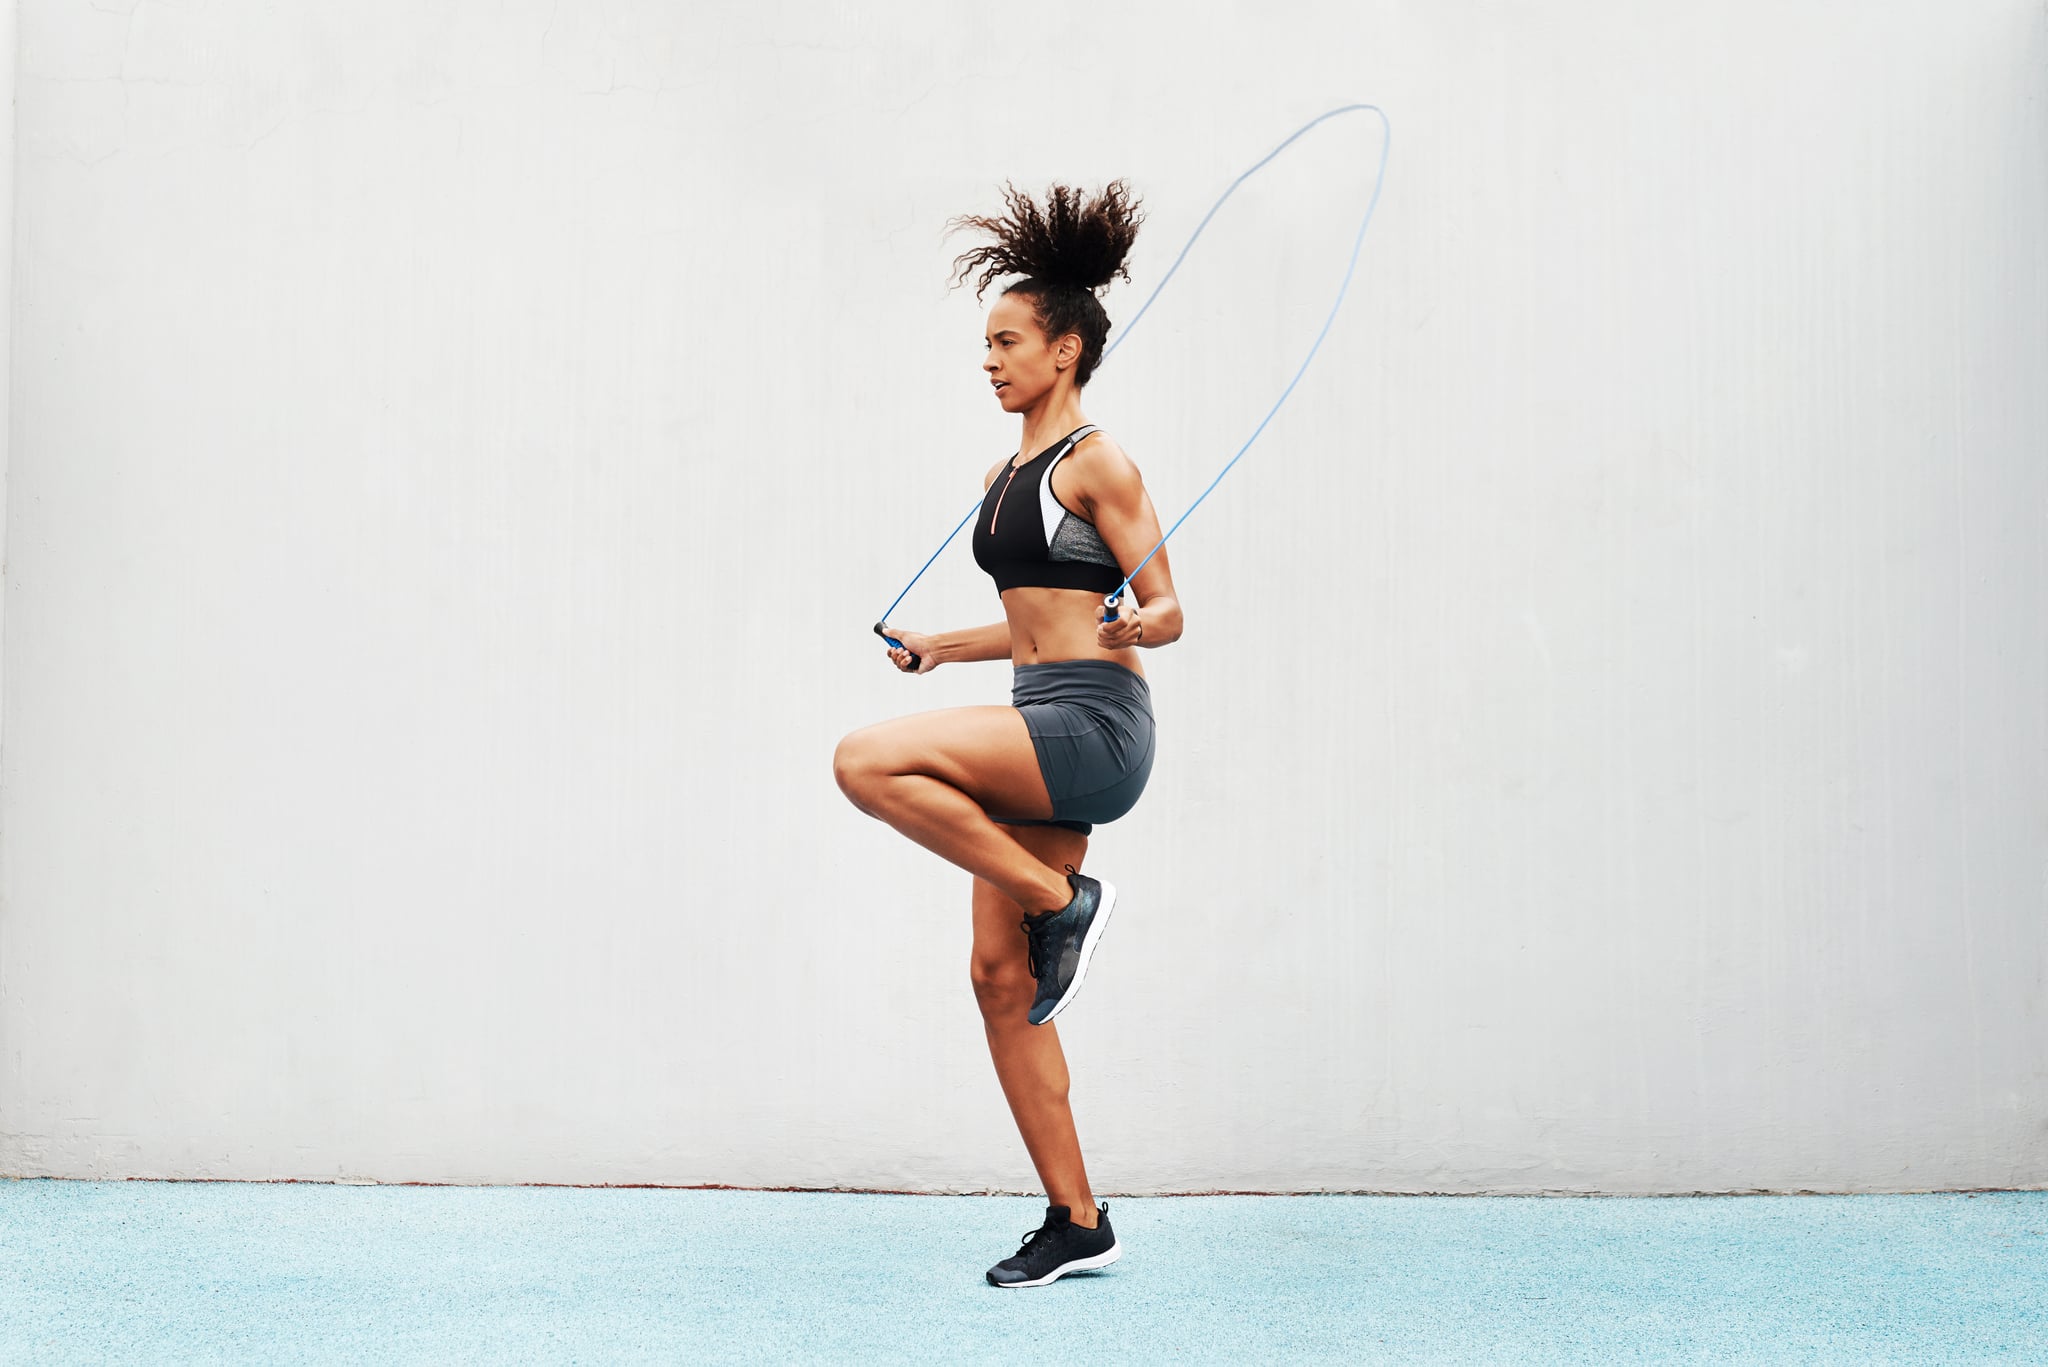 Full length shot of an attractive young athlete using a skipping rope during an outdoor training session